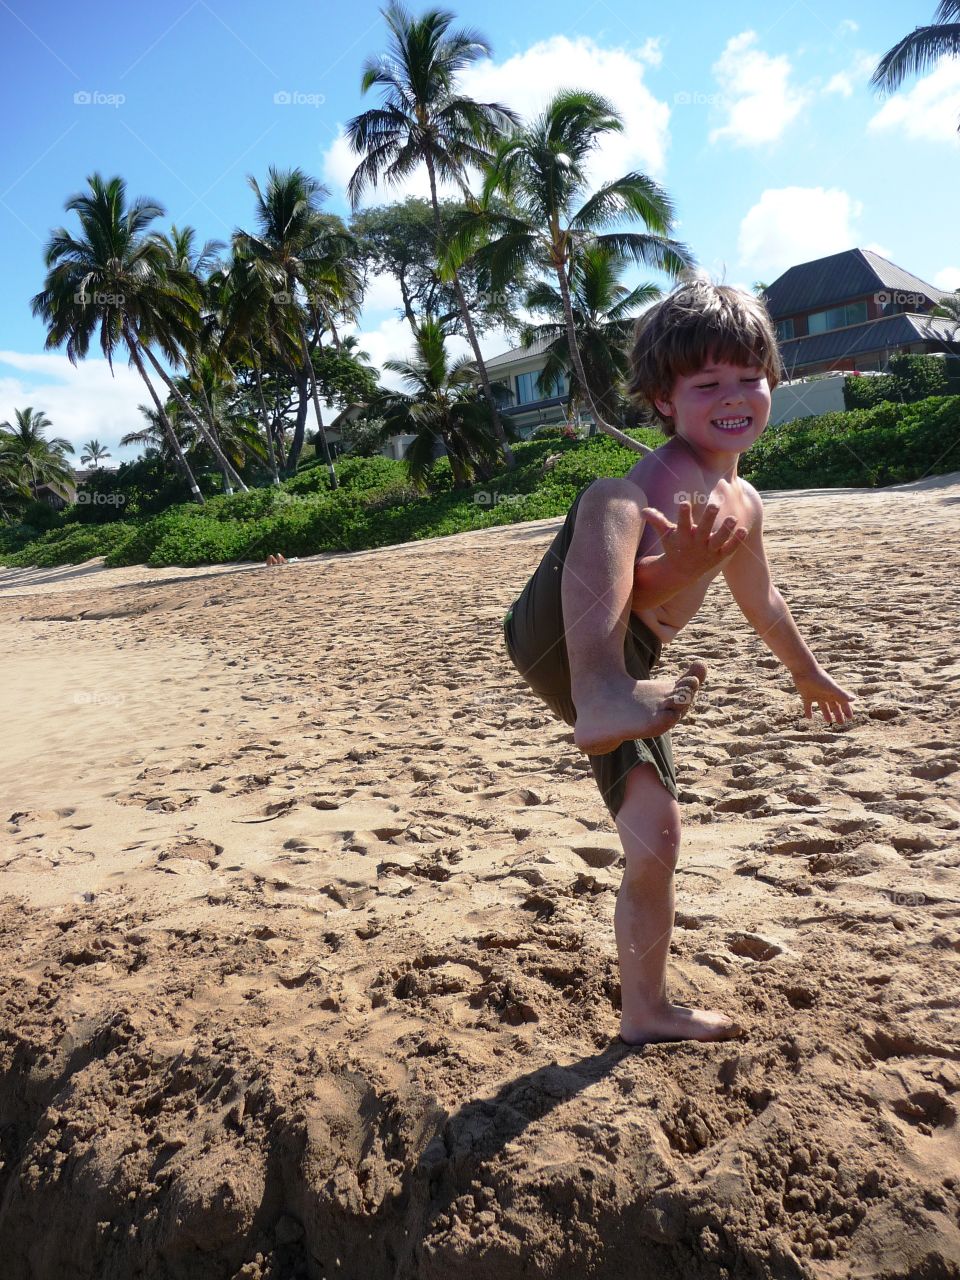 Close-up of boy playing on sand